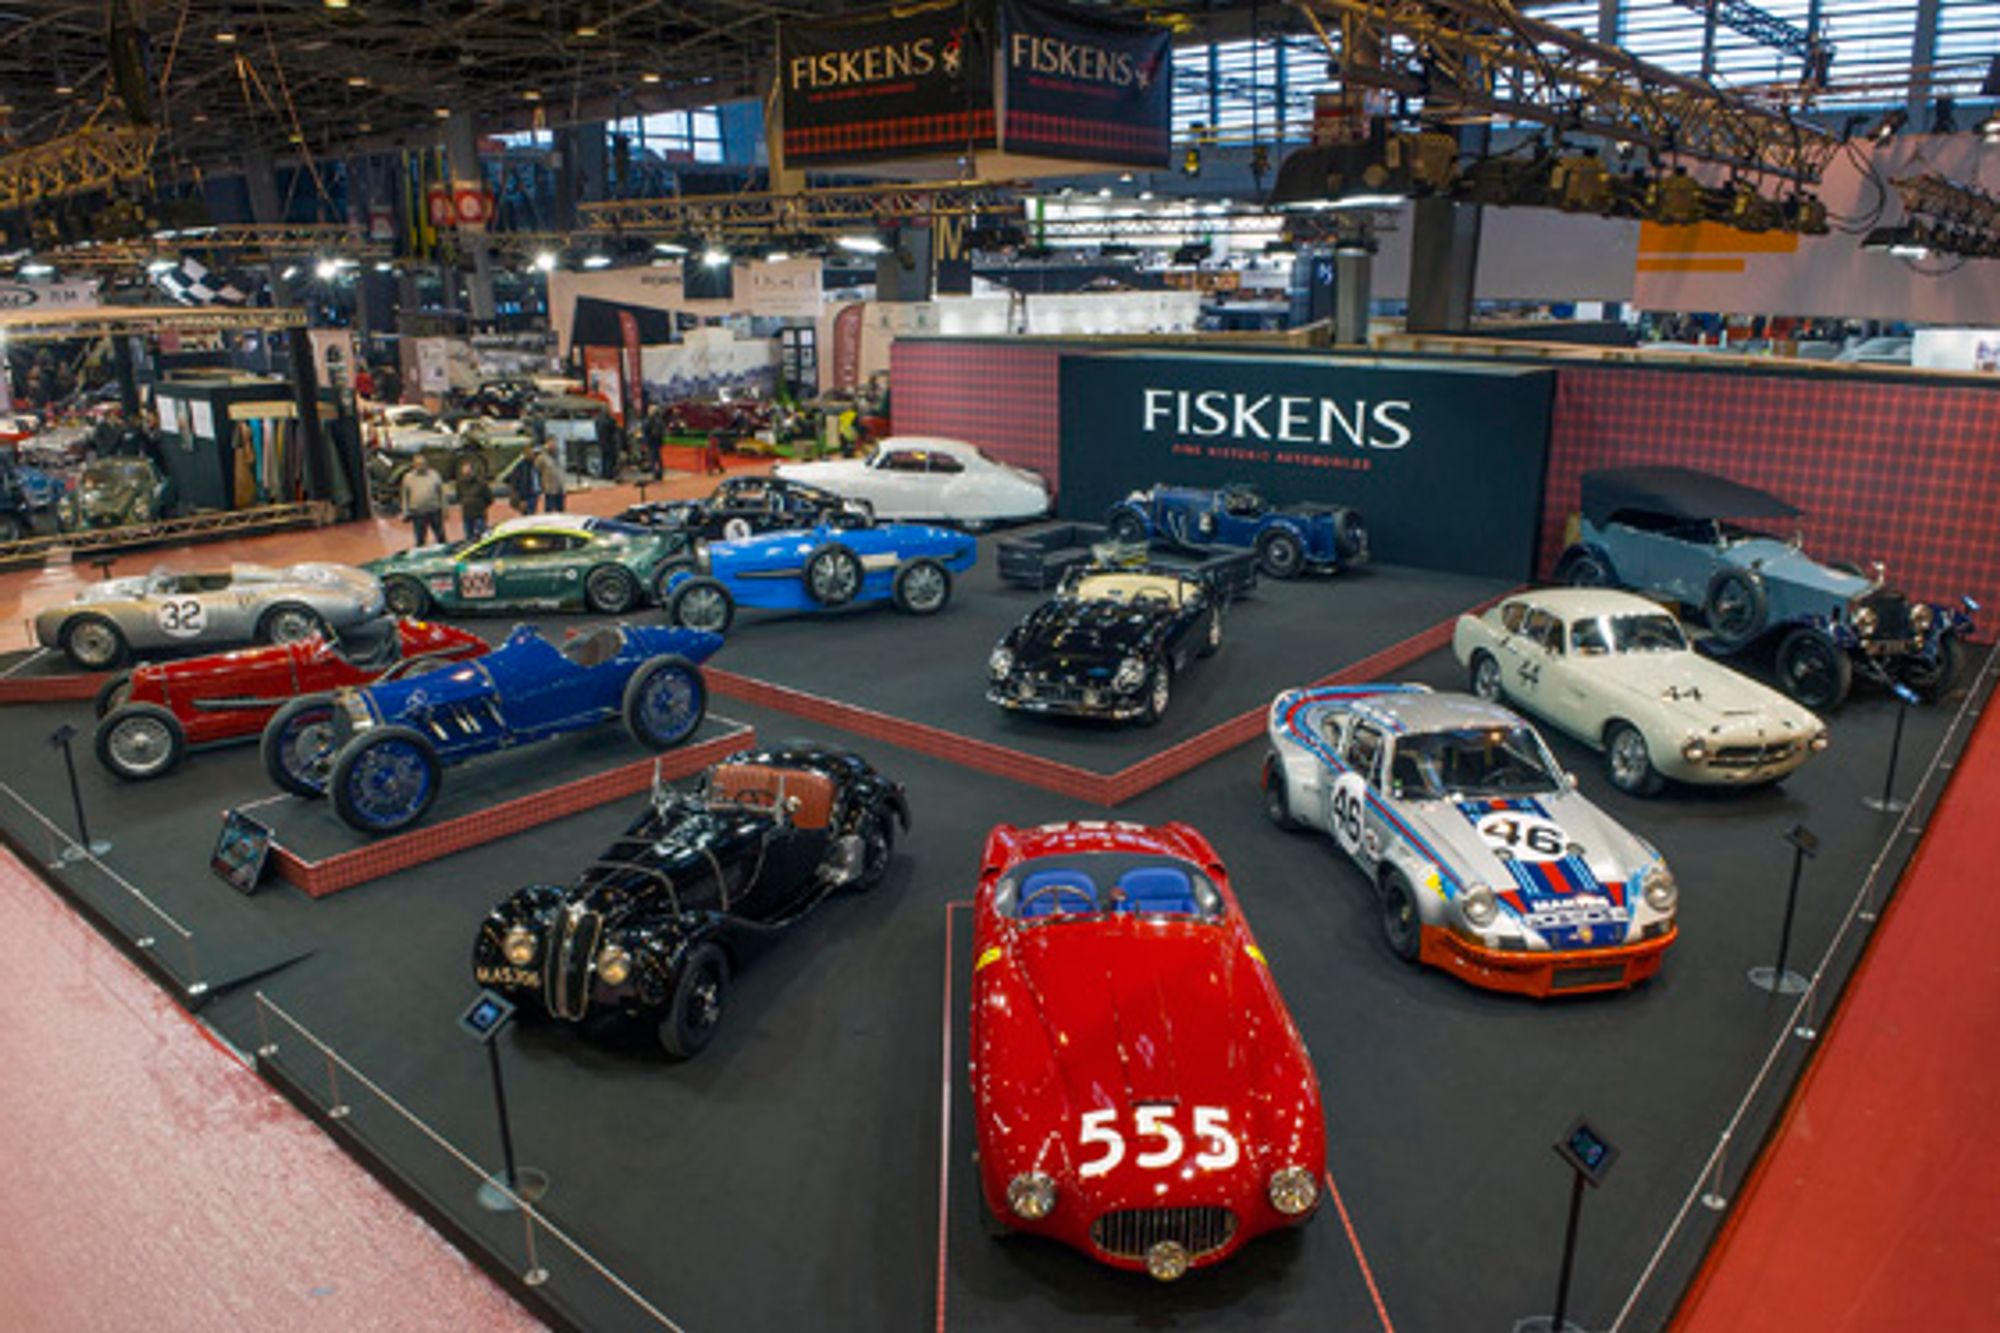 Fiskens reveal another striking Retromobile collection in Paris 